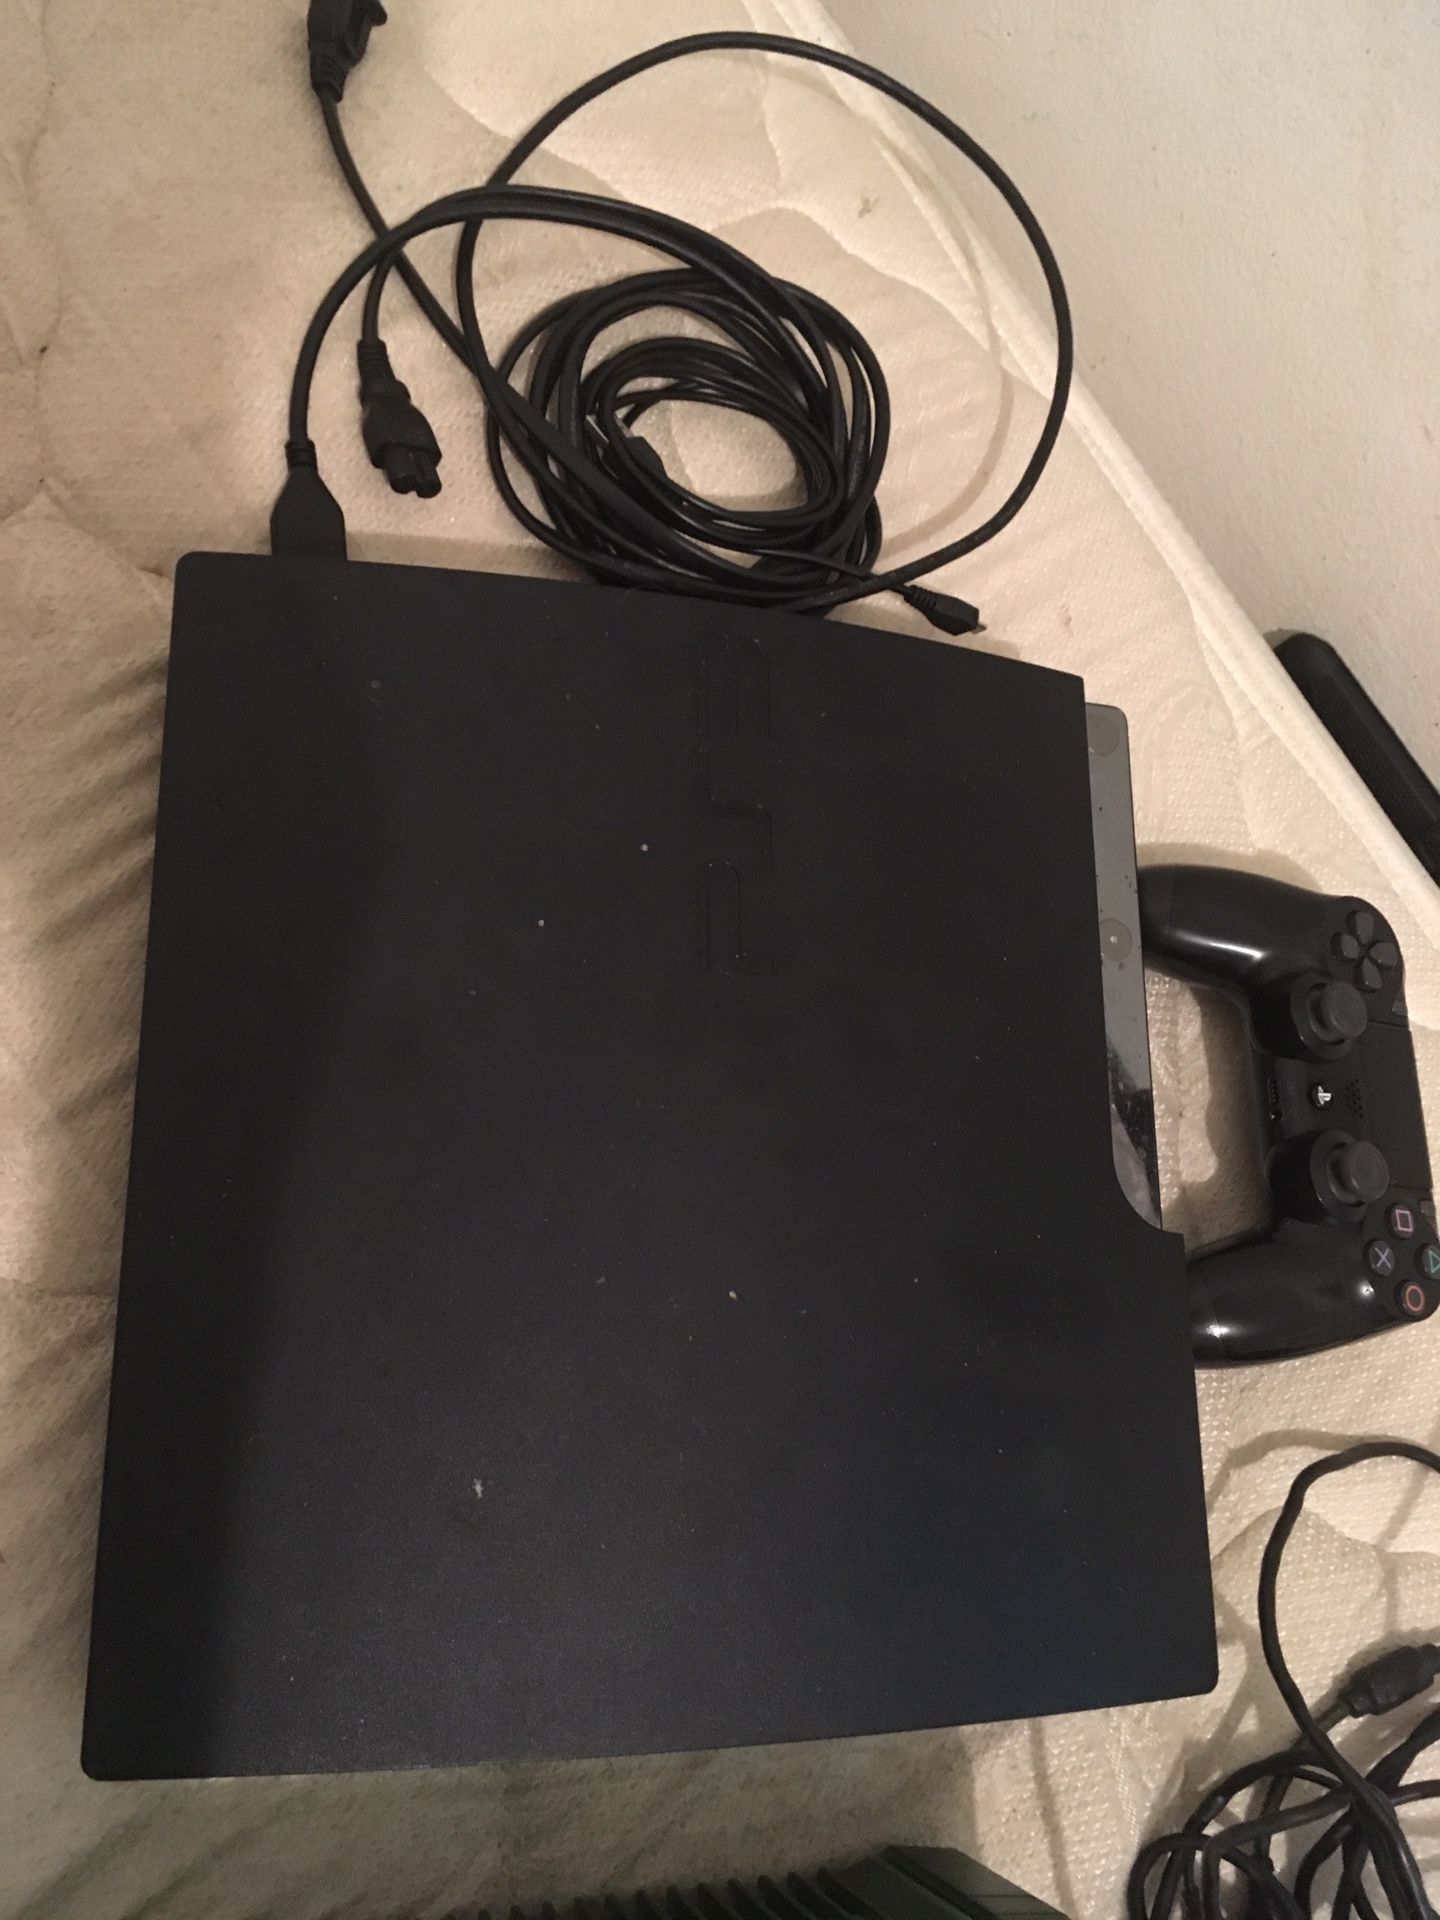 PS3 with all cords and controller